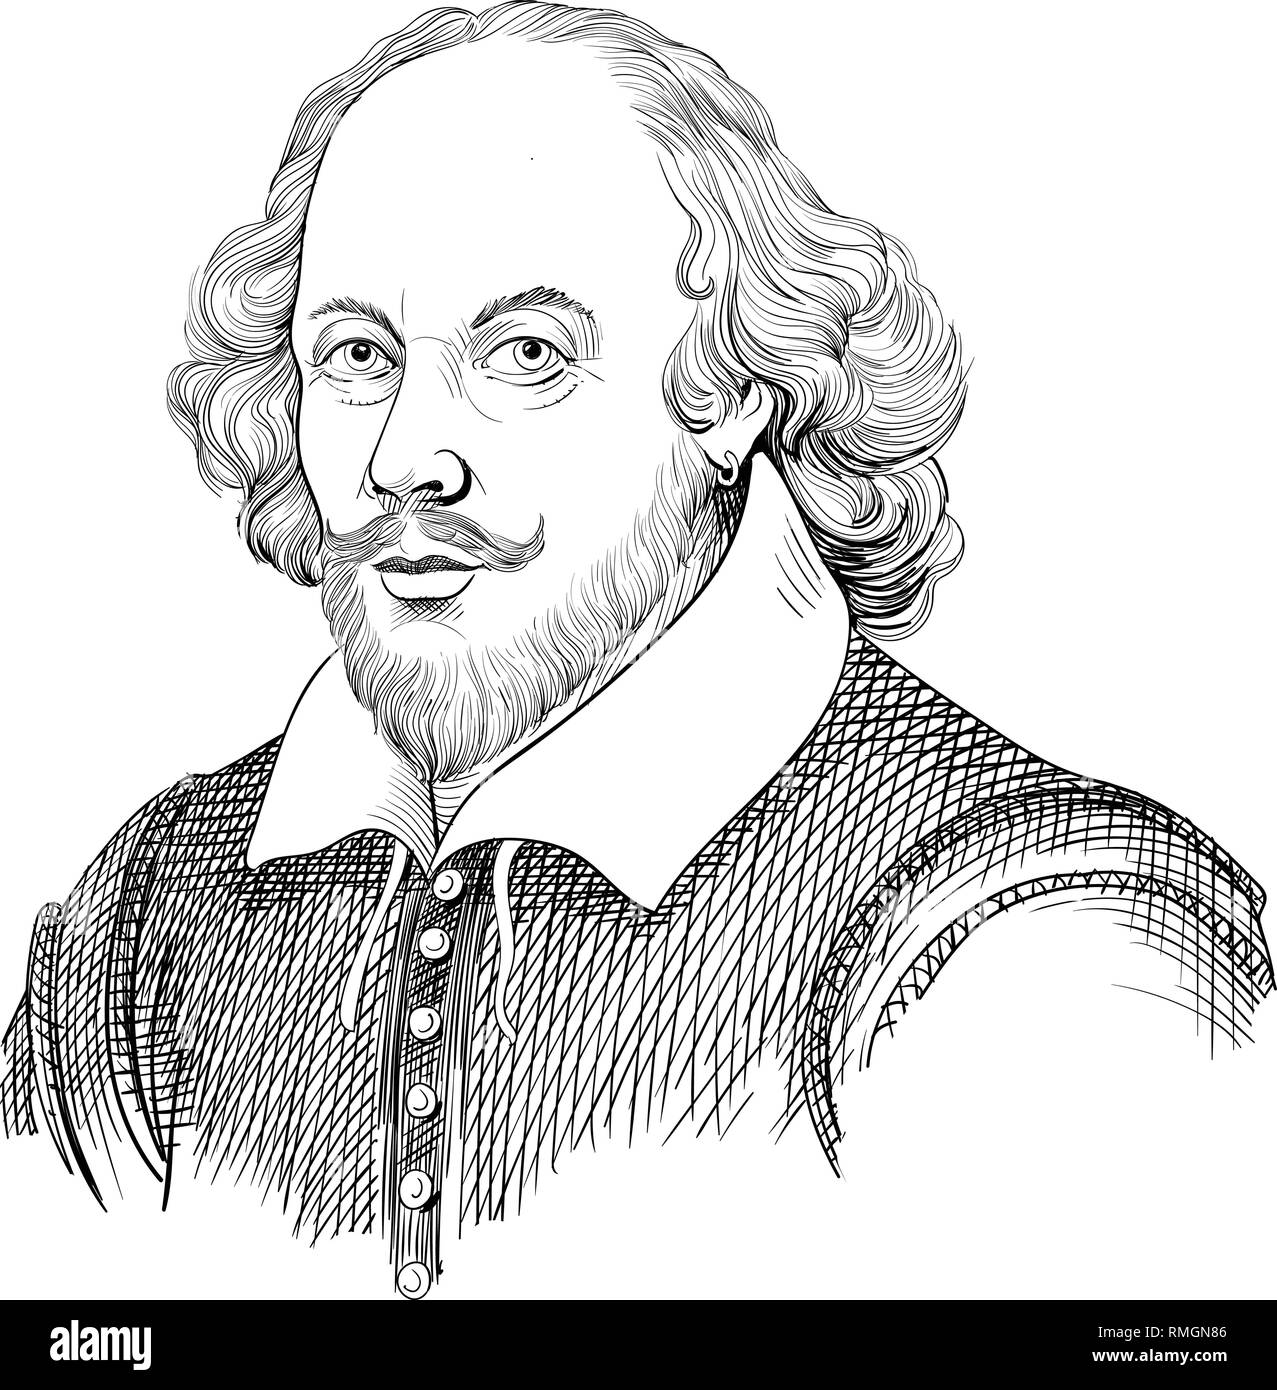 William Shakespeare portrait in line art illustration. He was English poet, playwright, actor, regarded as the greatest author in English literature. Stock Vector